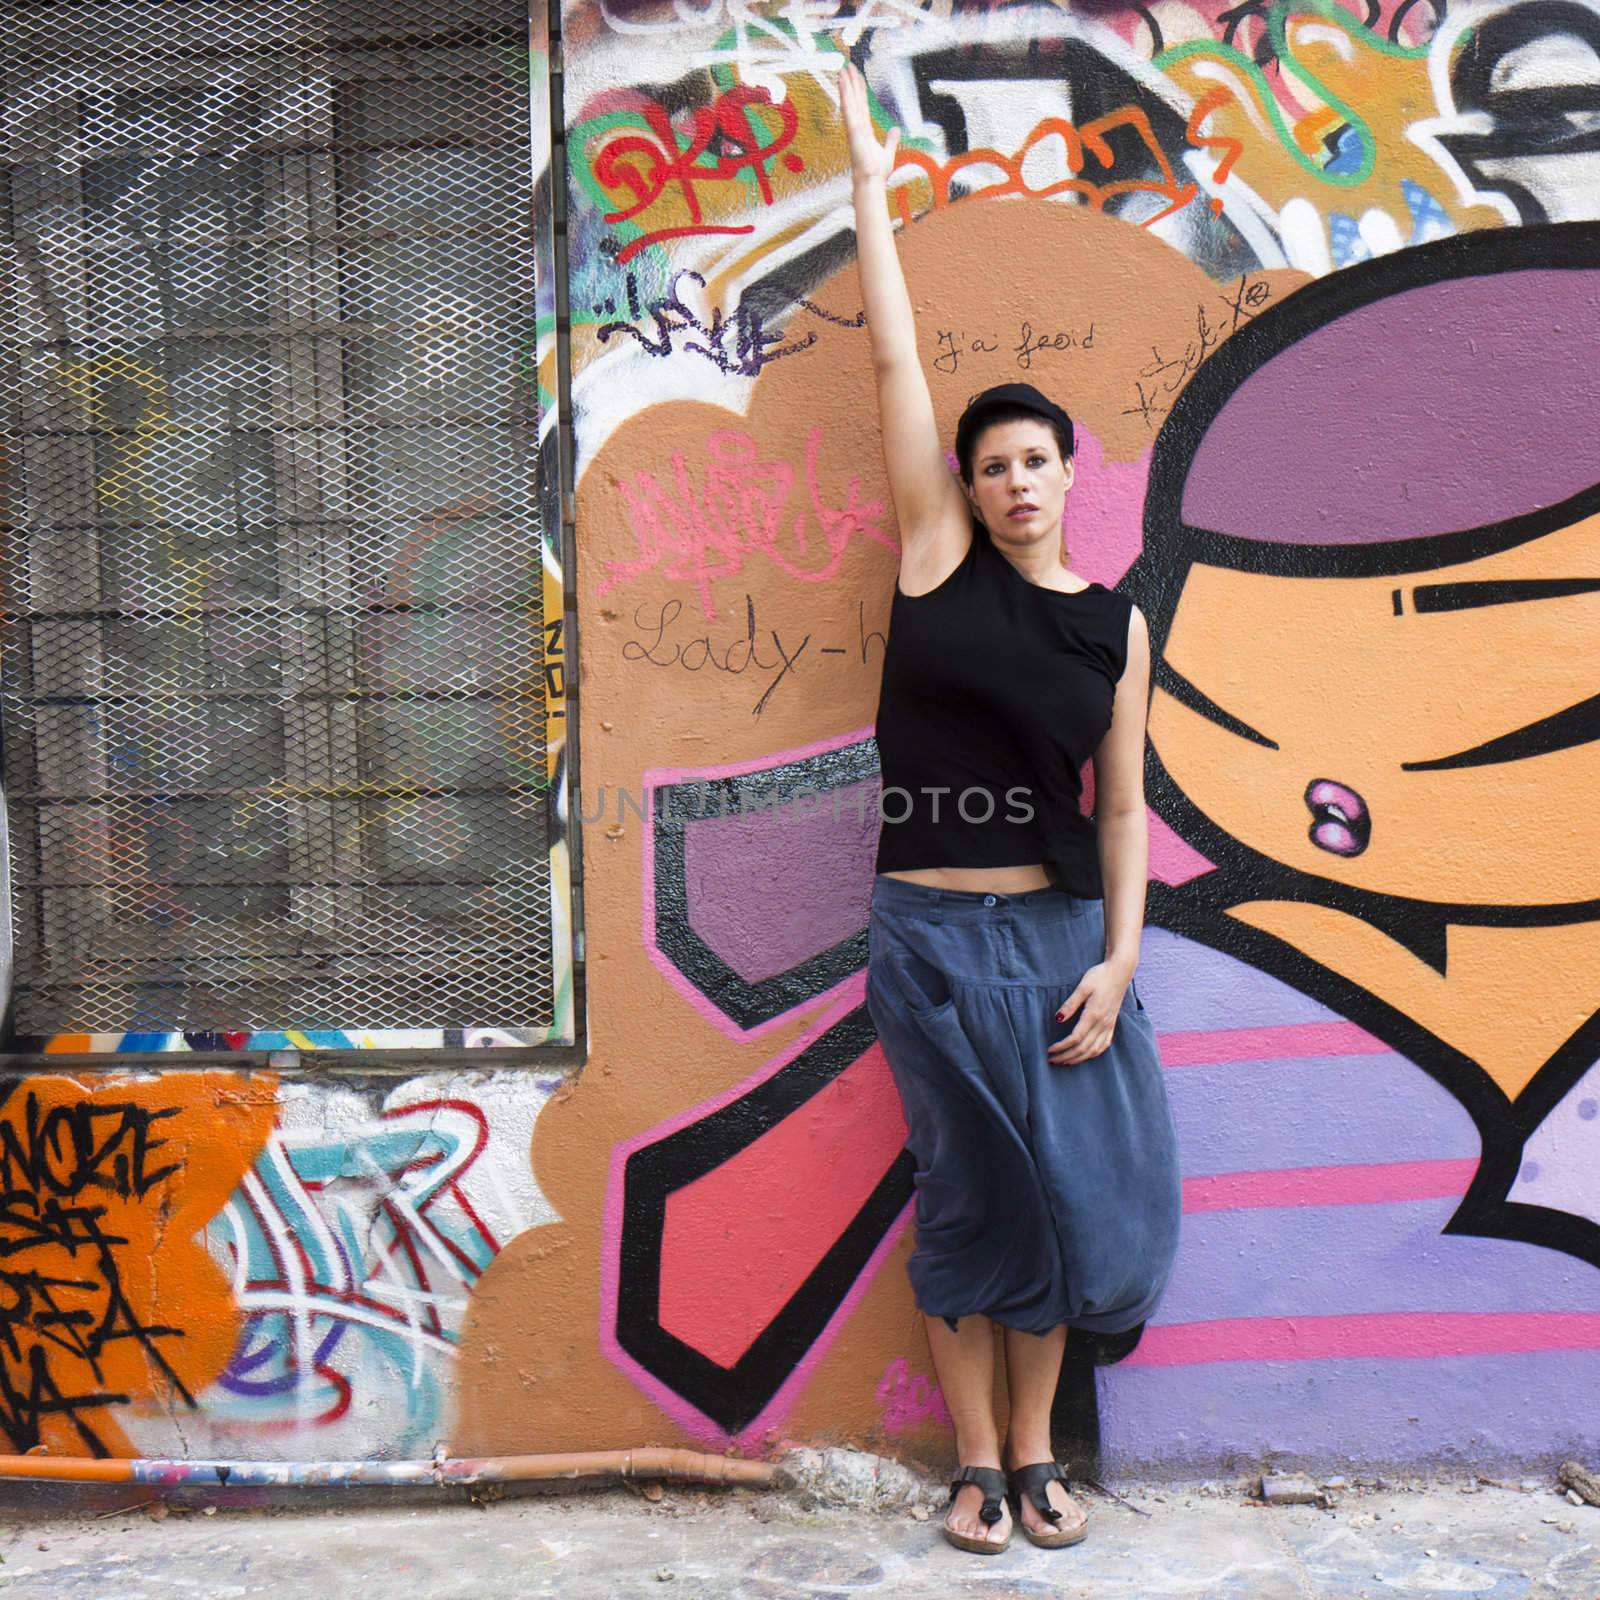 a woman stretches before a wall covered in graffiti